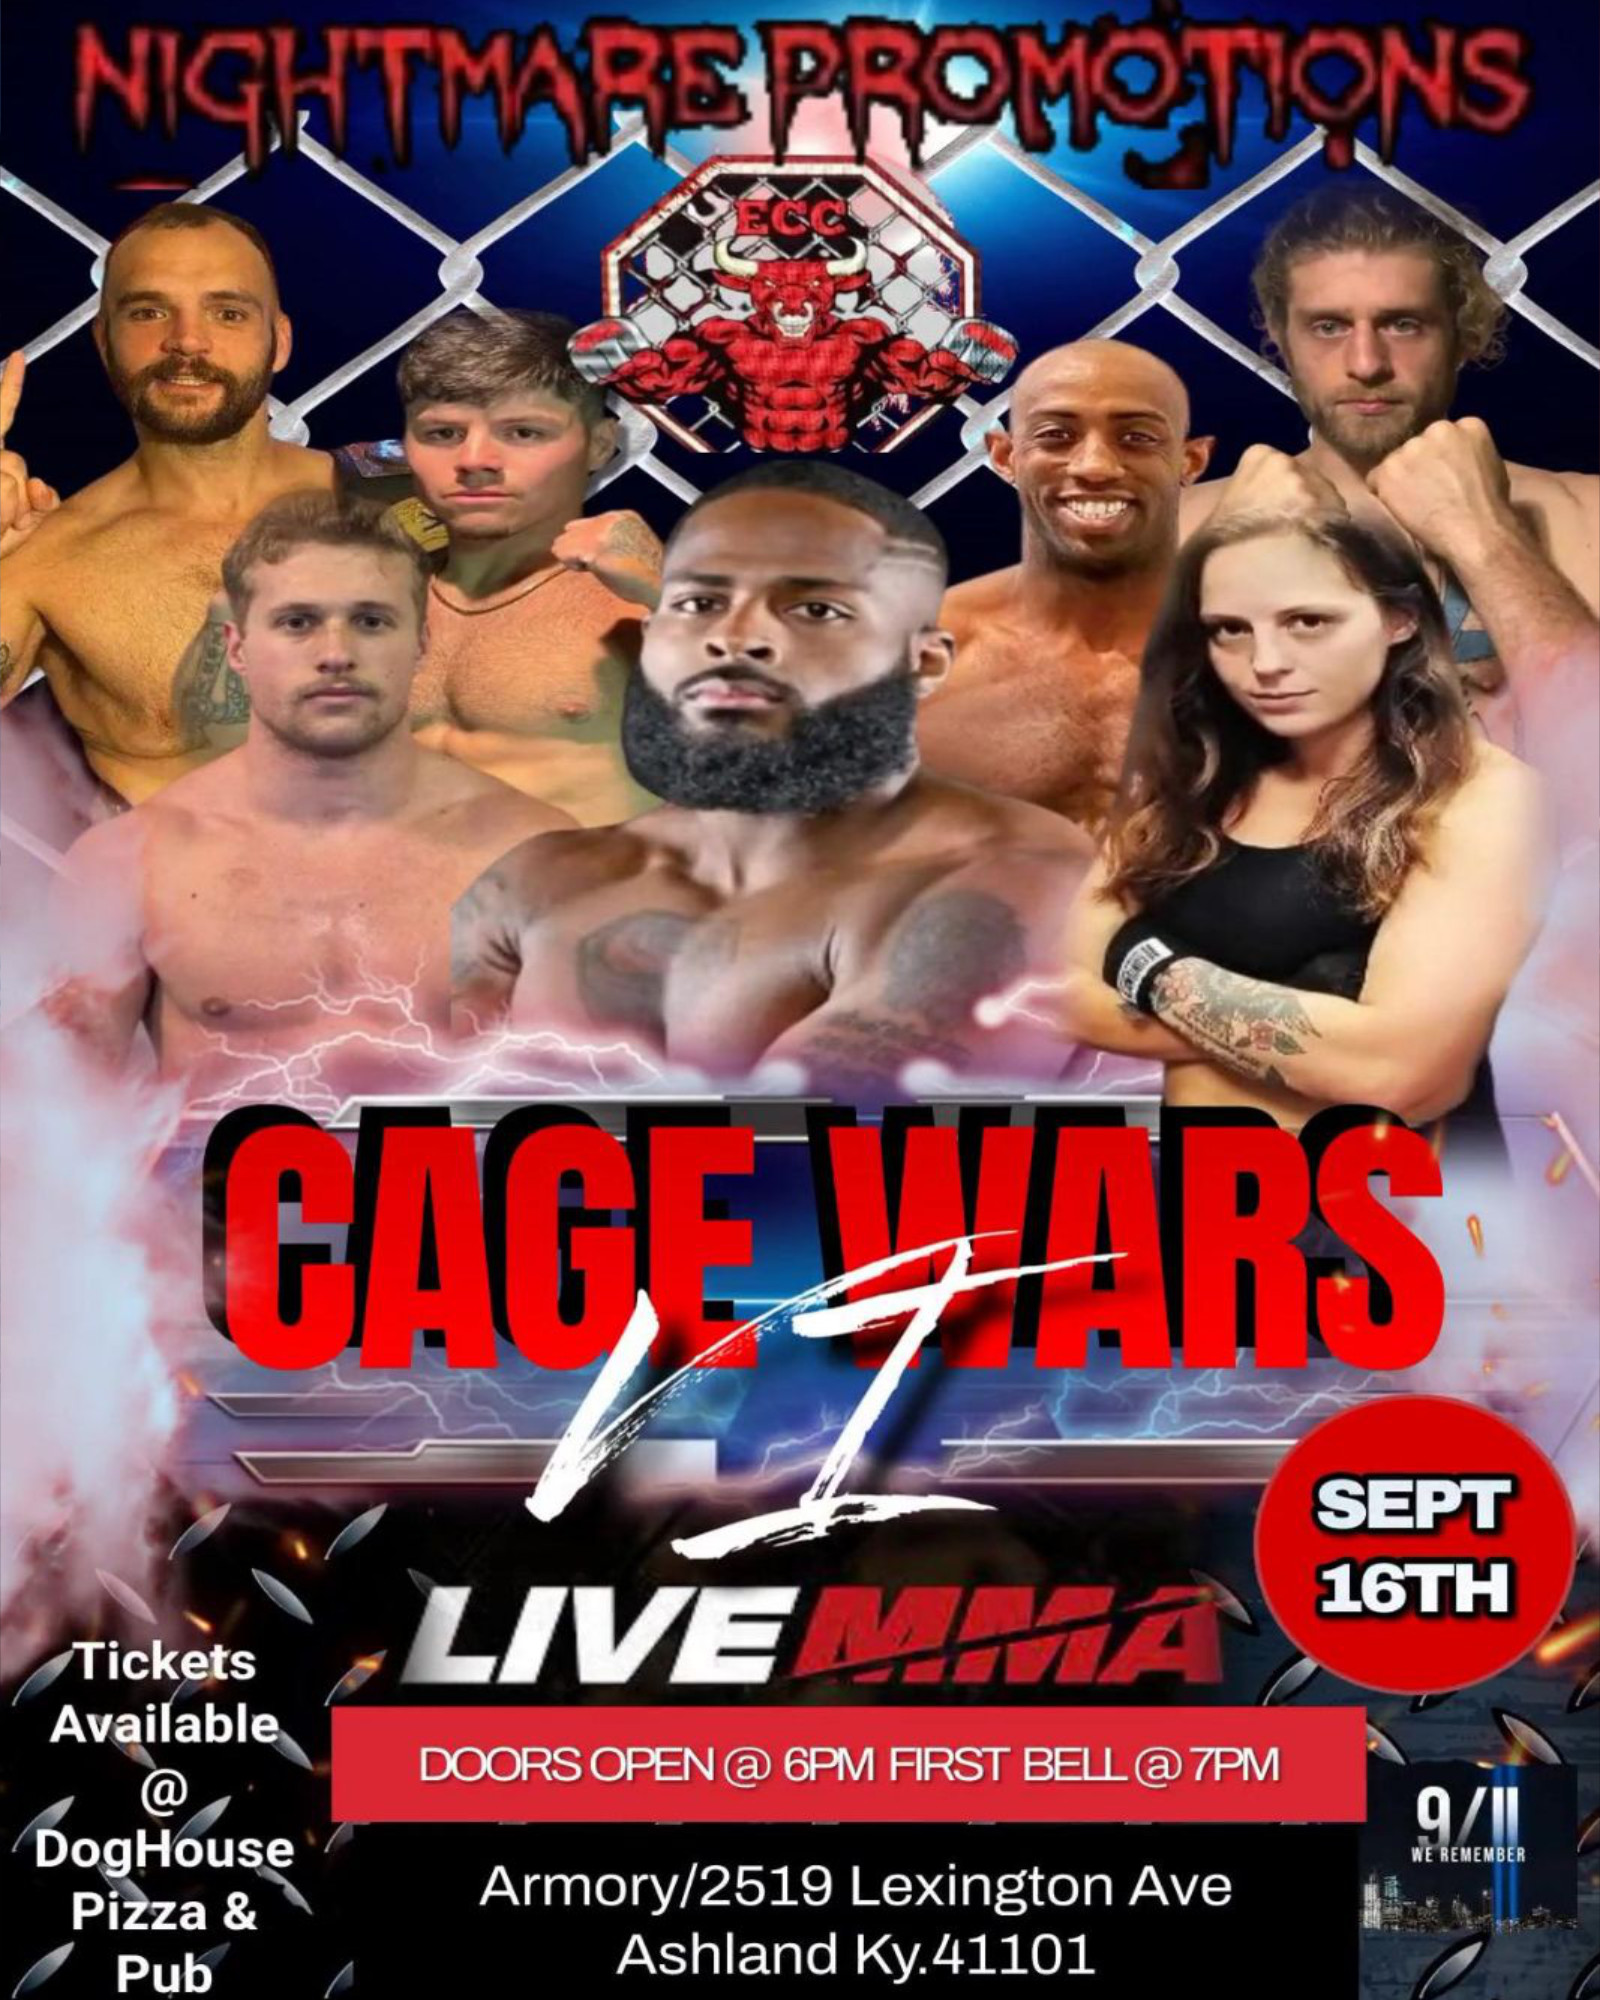 ECC Cage Wars 6 Live on Combat Sports Now